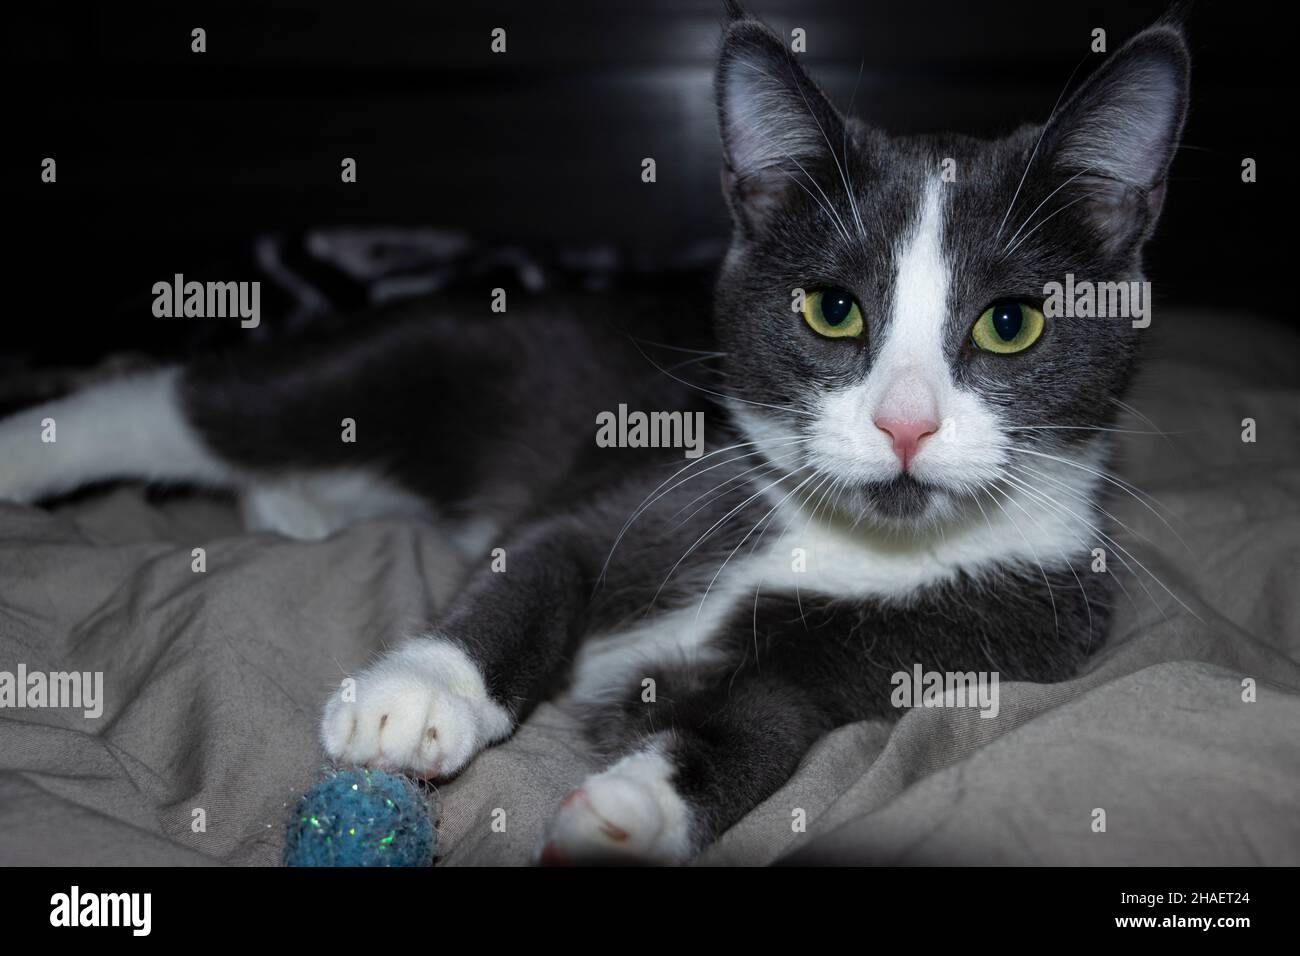 Grey and White kitten with bright green eyes and pink nose laying on bed looking at camera with ball by paw Stock Photo